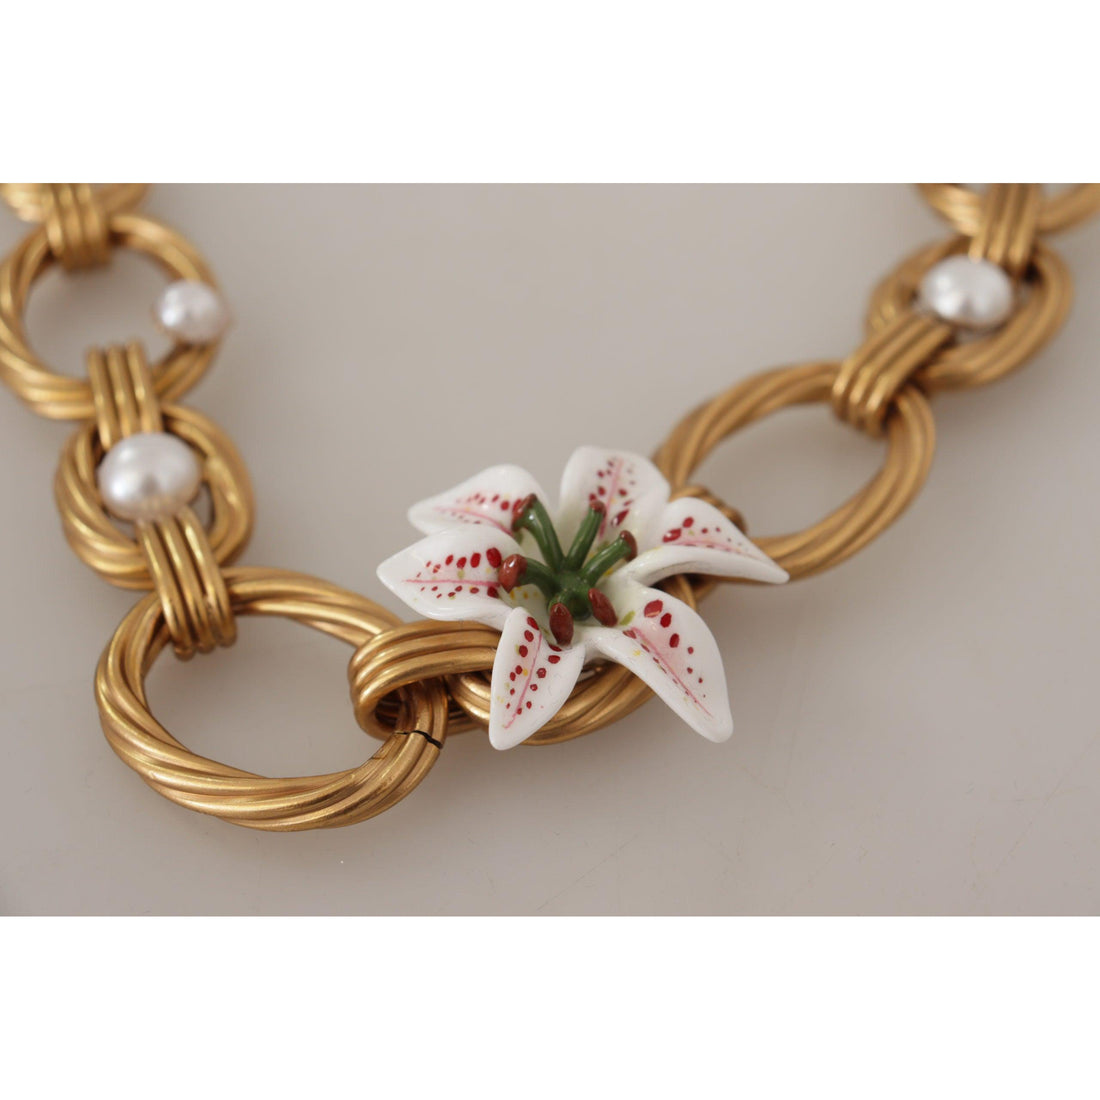 Dolce & Gabbana Gold White Lily Floral Chain Statement Necklace